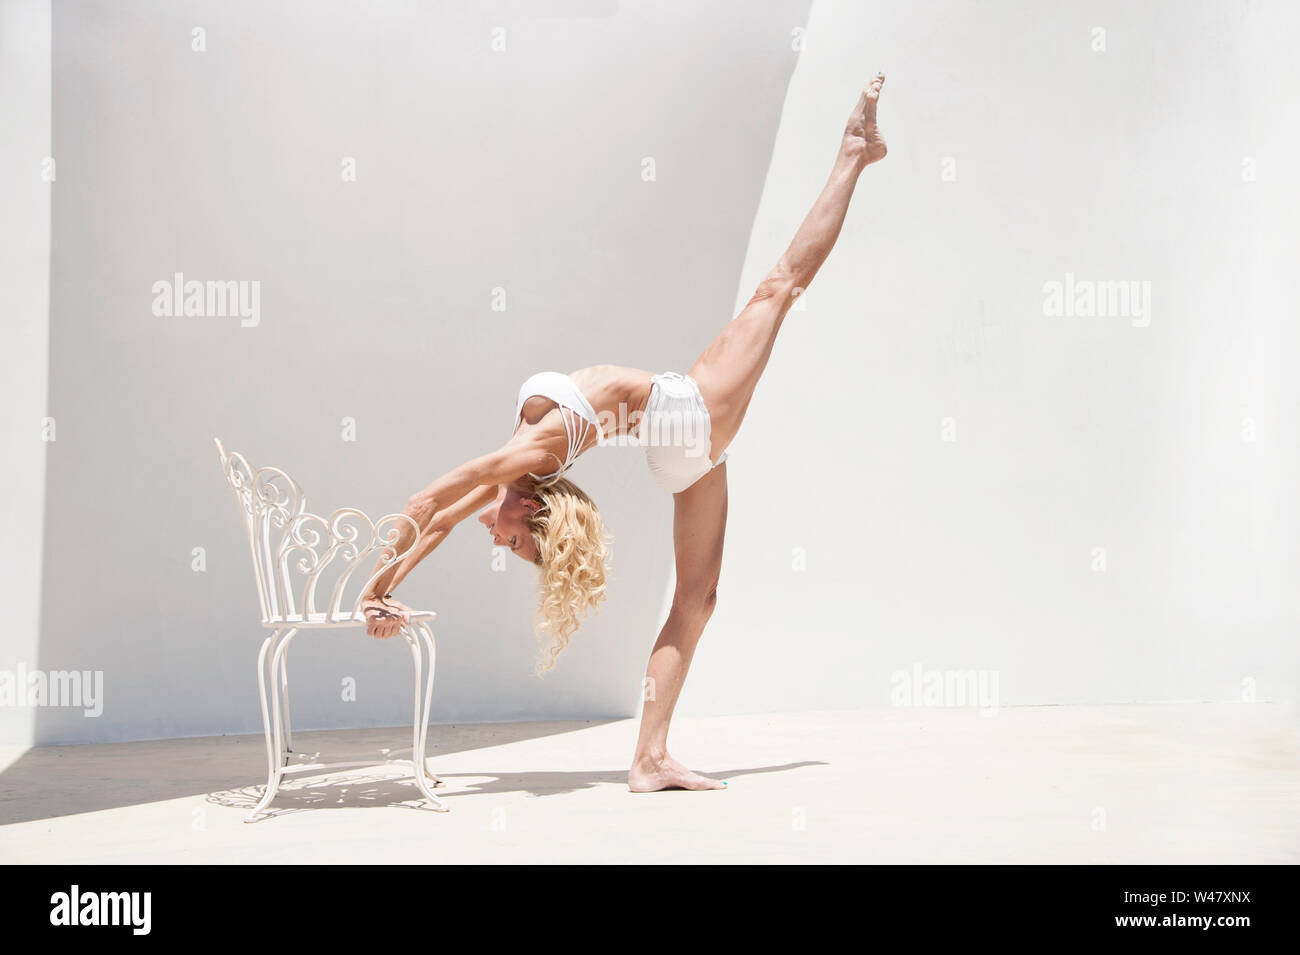 Classical beauty in yoga wheel pose or upward bow posture utilizing a beautiful chair as a prop. This woman is a ballerina turned yogi. Stock Photo